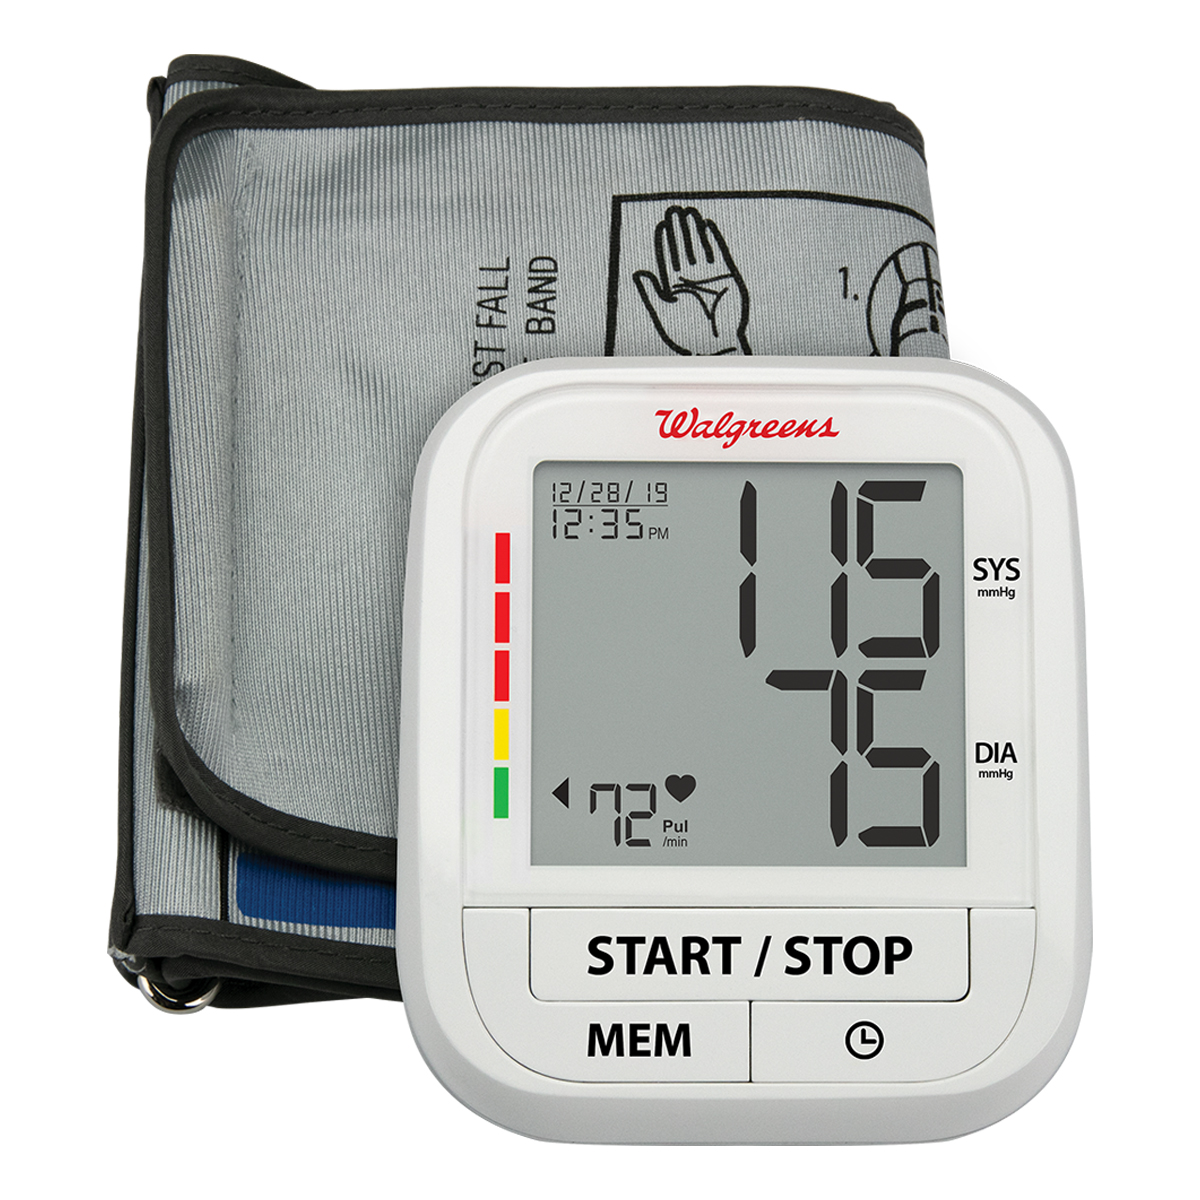 WGNBPA-220 Arm Blood Pressure Monitor package view